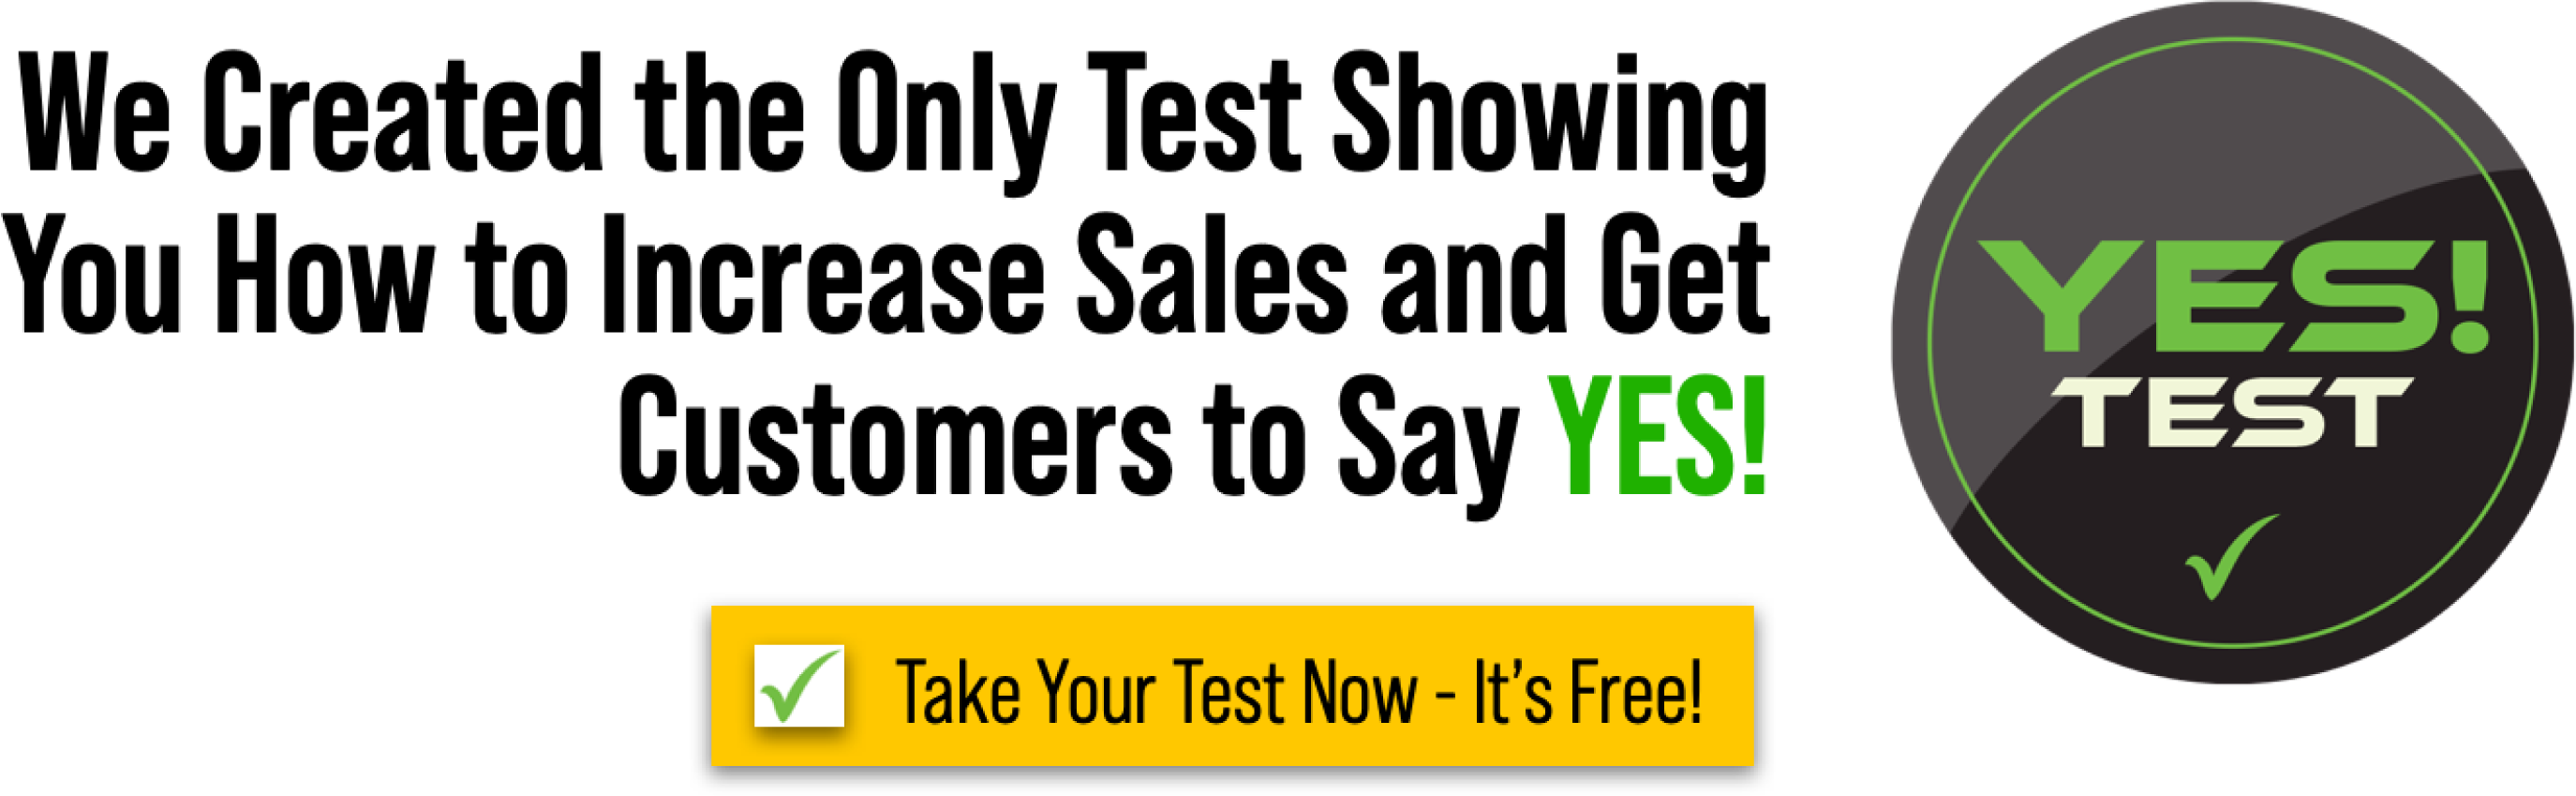 Get Yes! Test